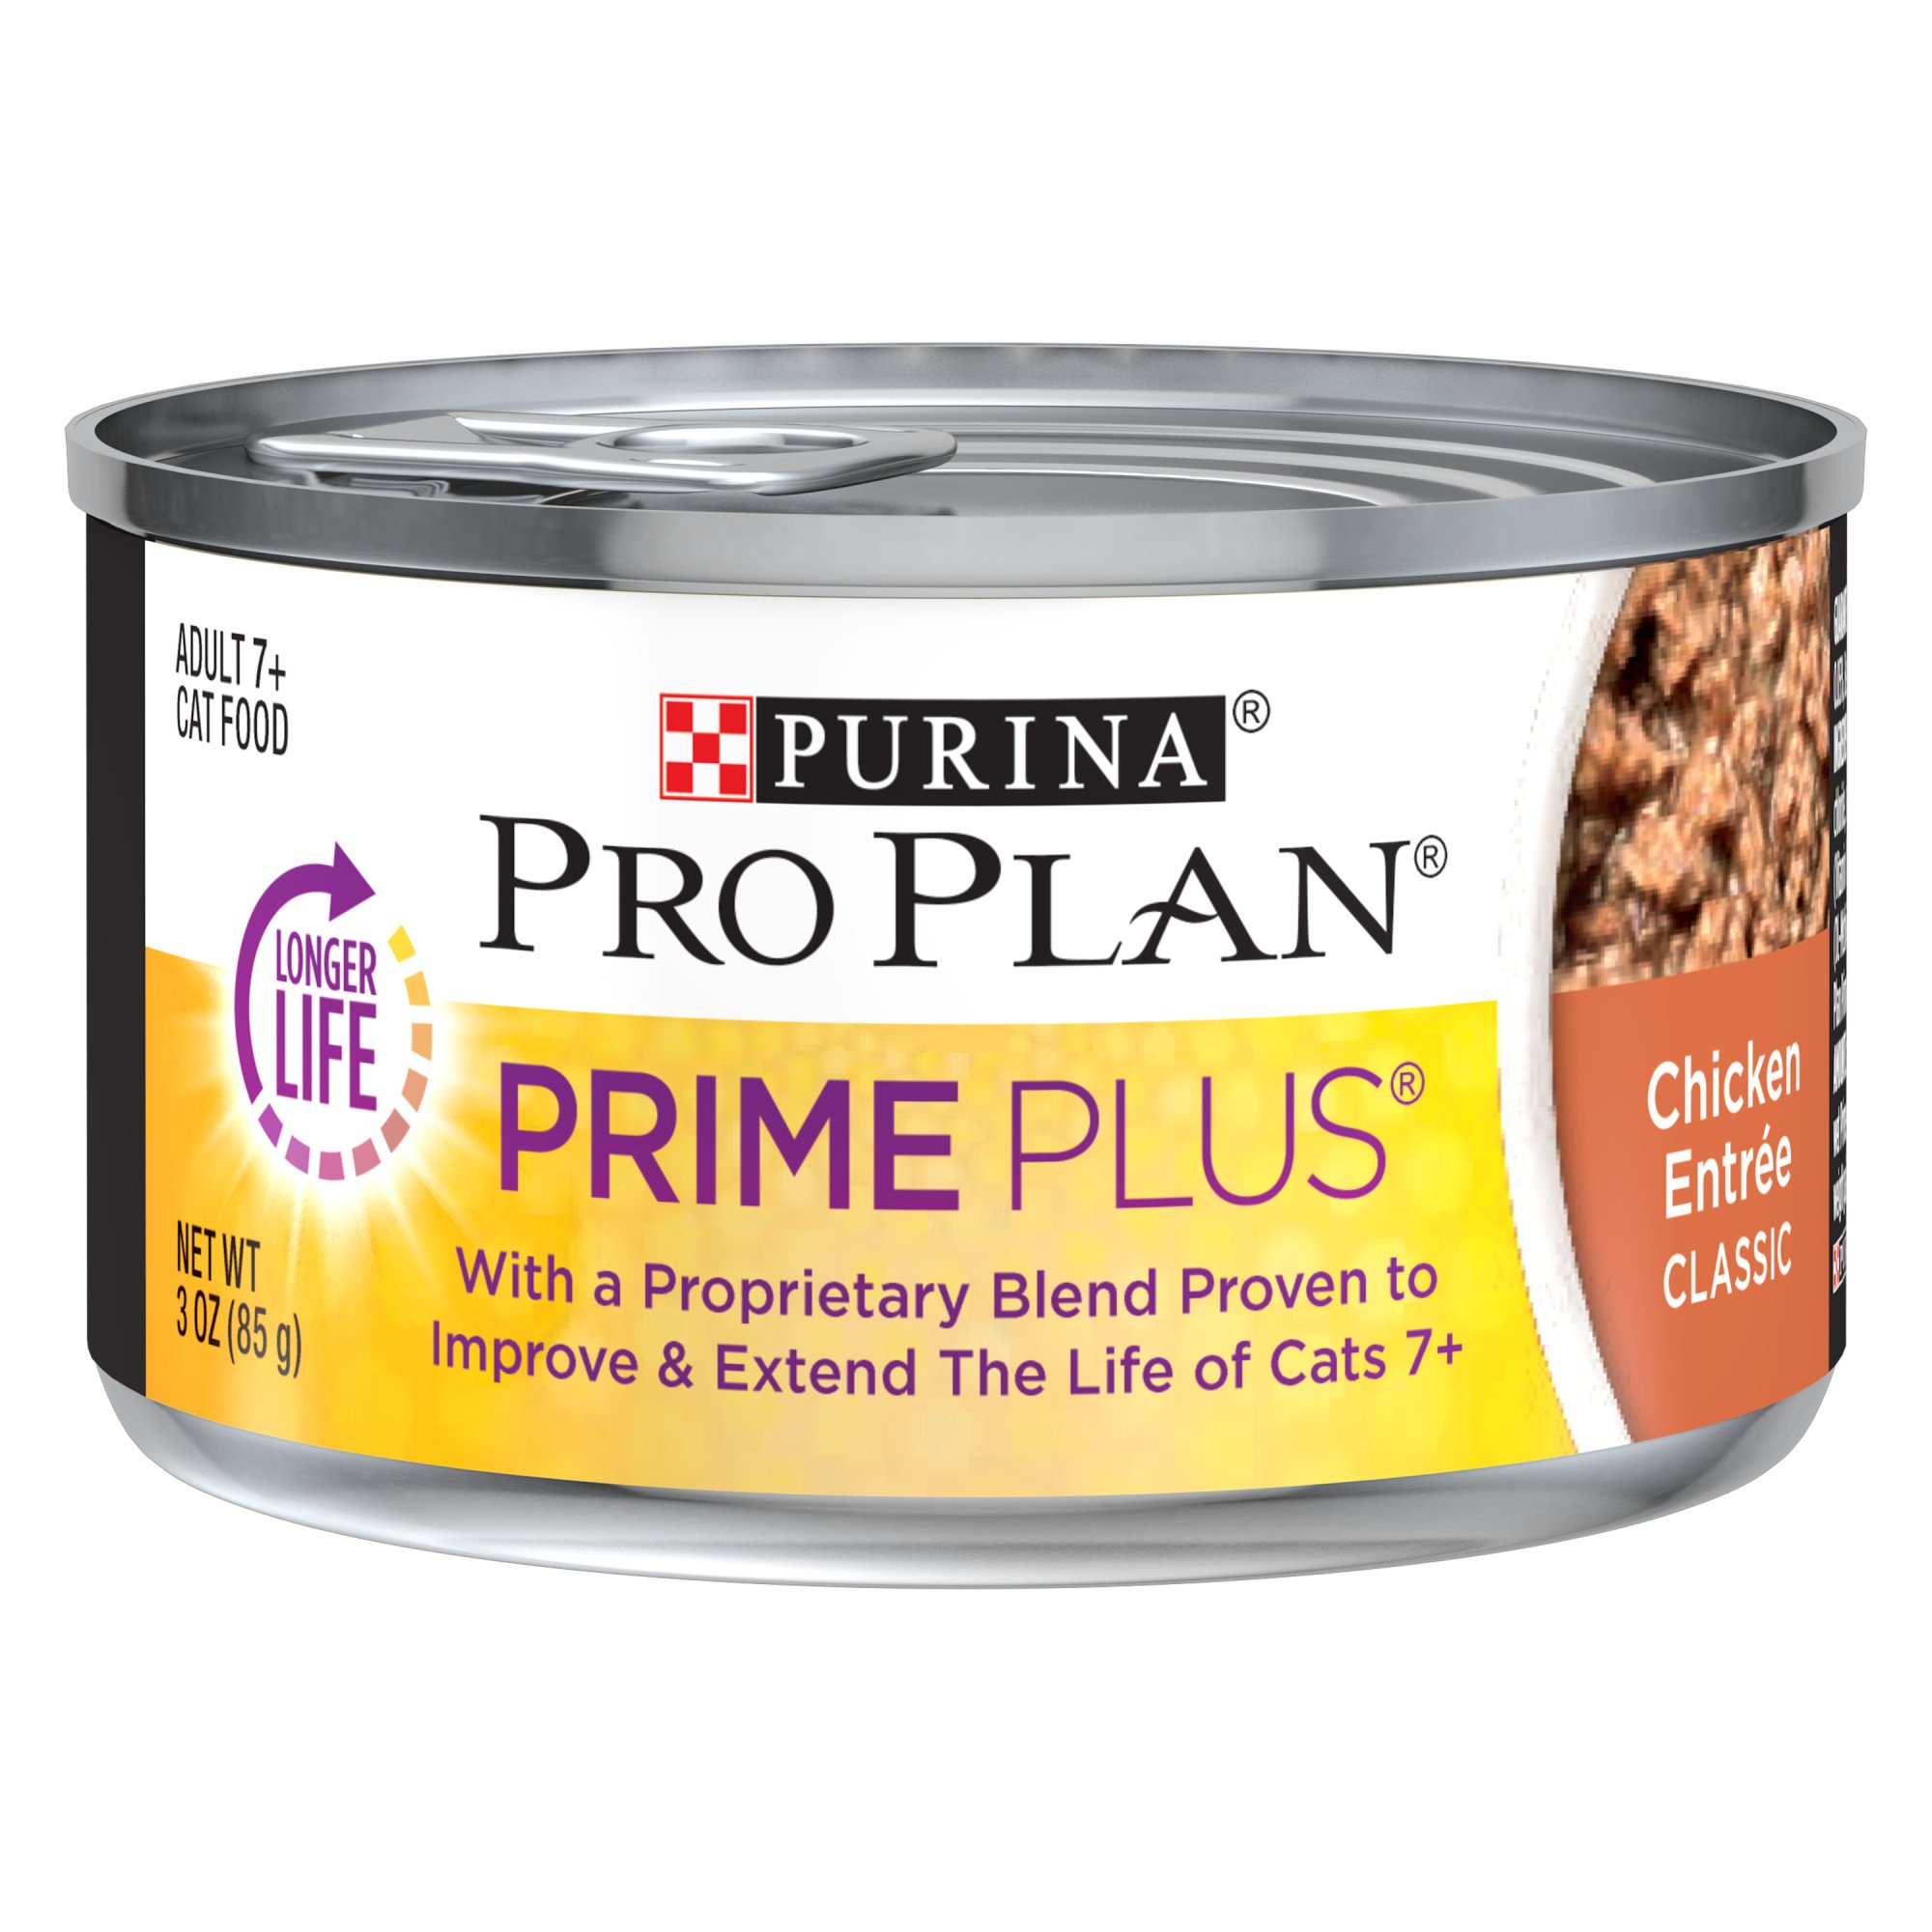 Purina Gentle Cat Food Discontinued